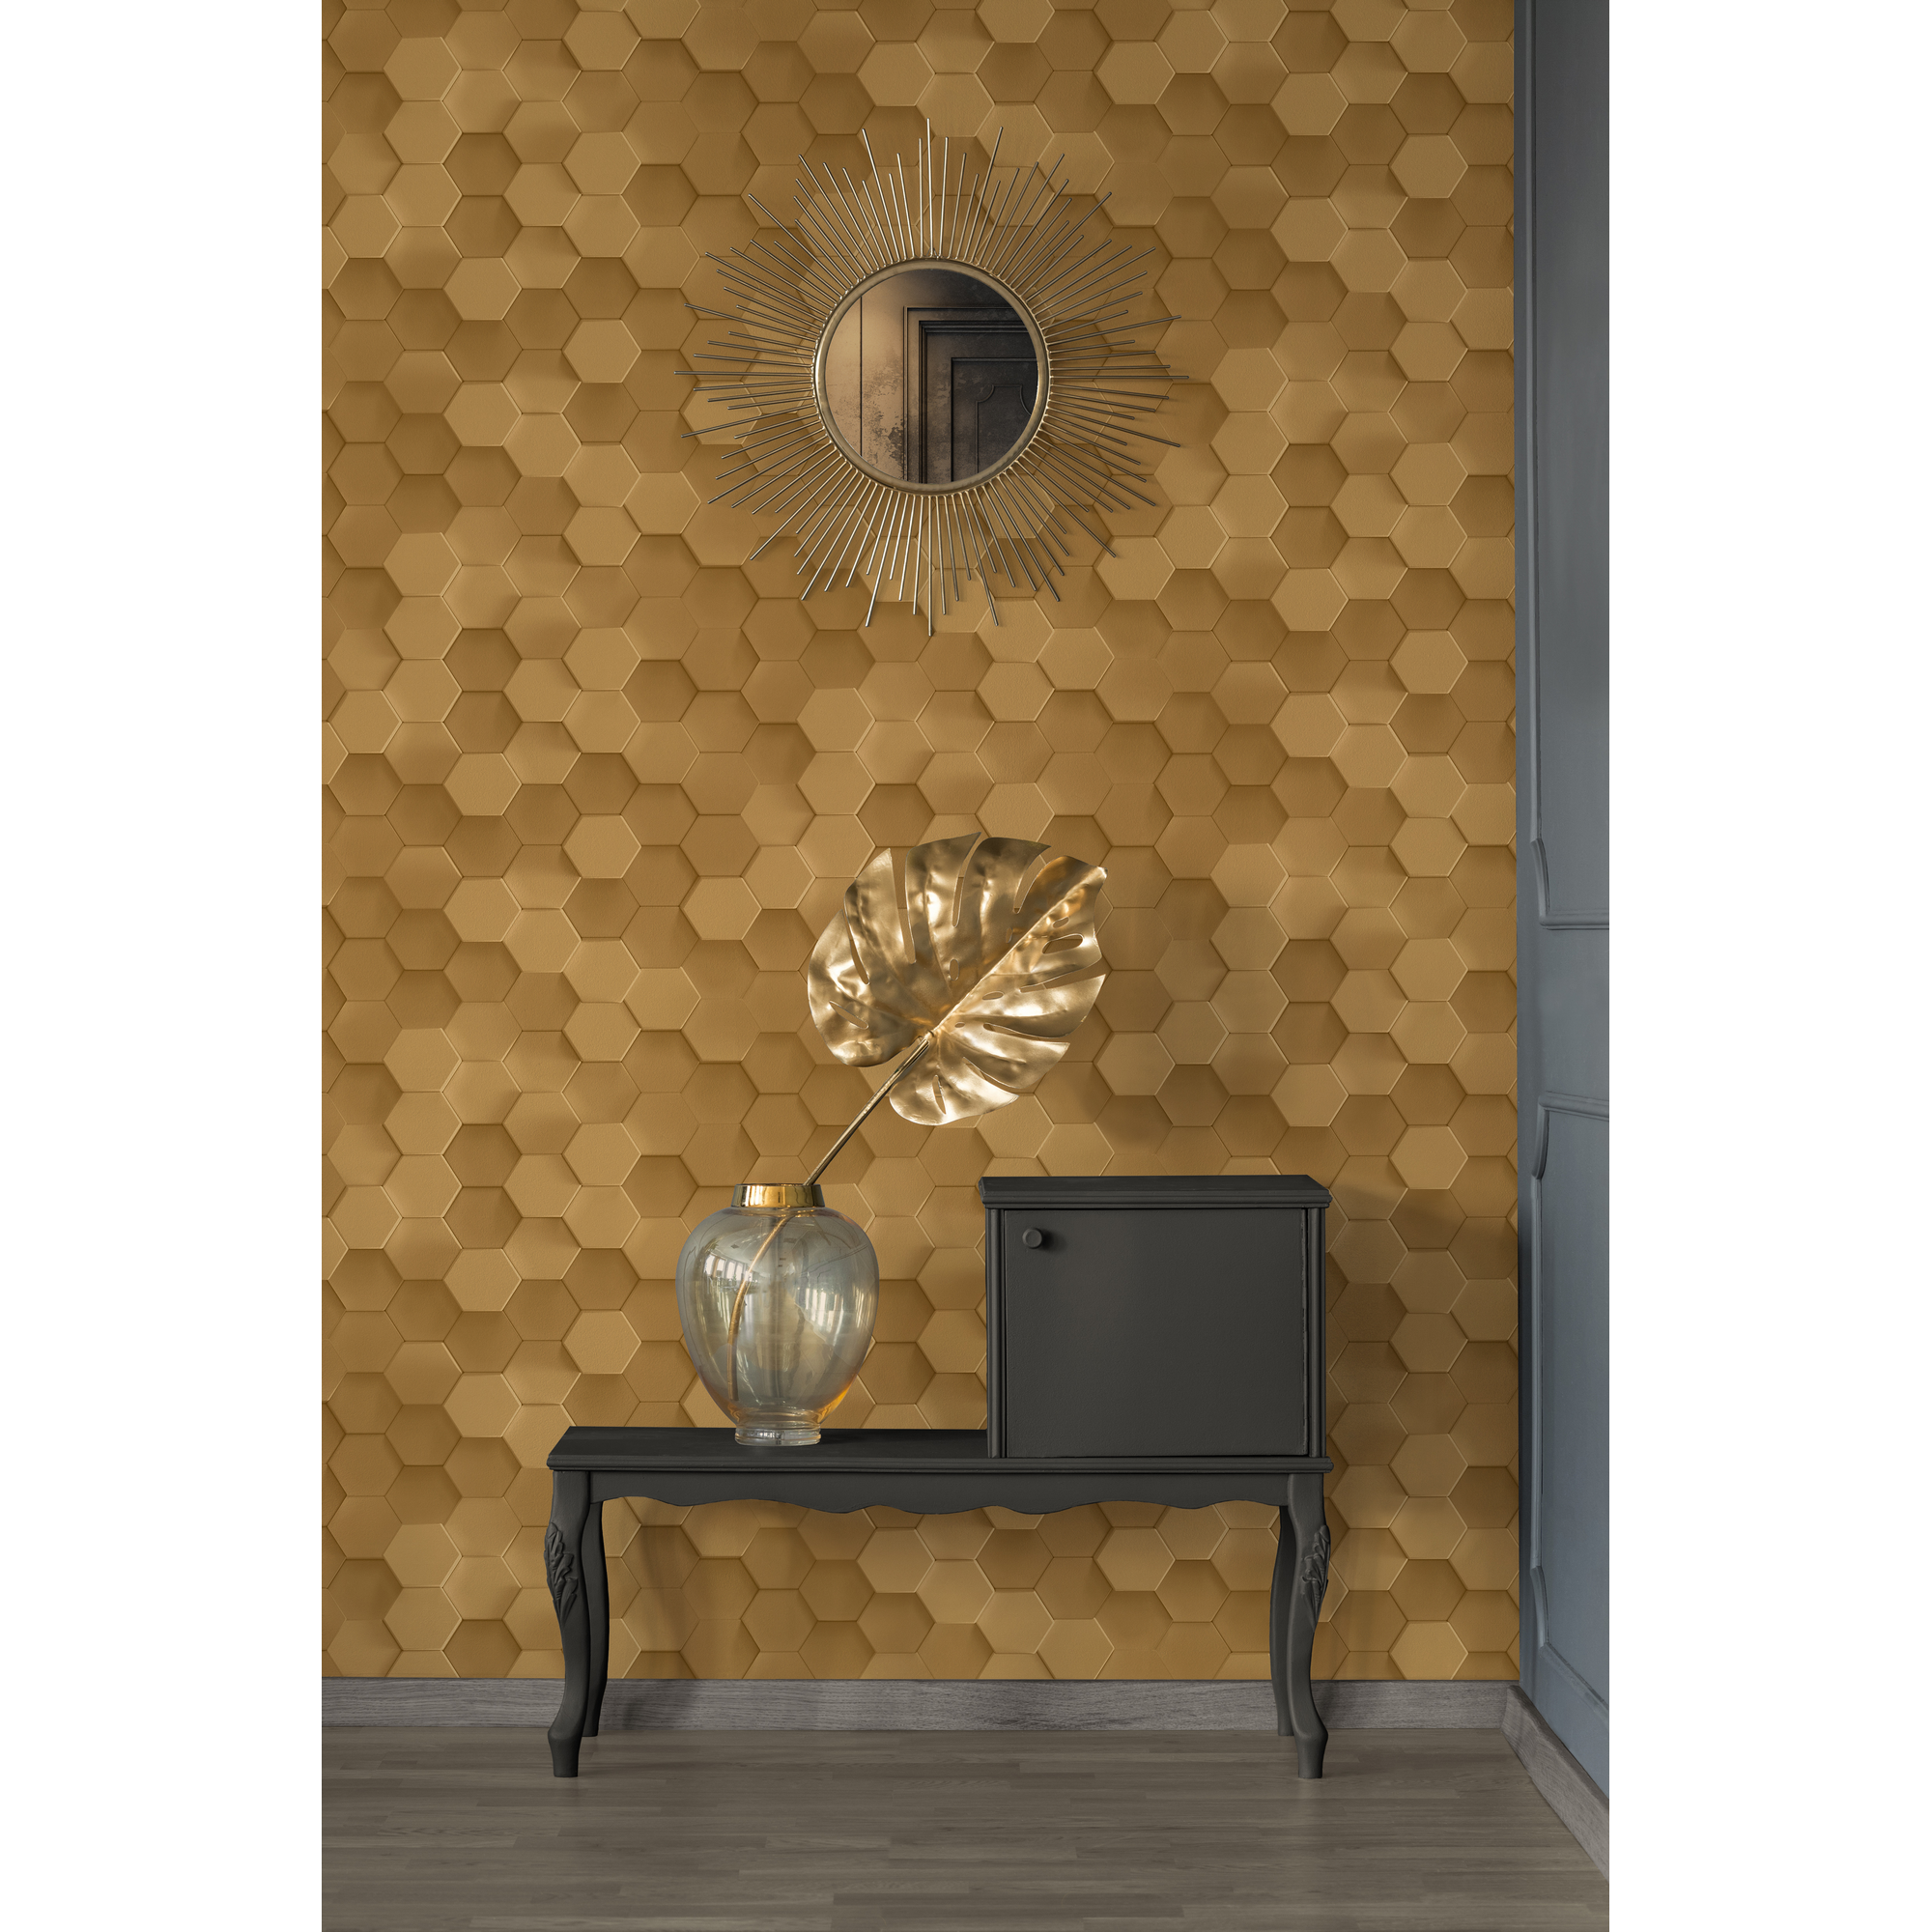 Vliestapete 'Pint Walls' Wabenmuster 3D gold 10,05 x 0,53 m + product picture